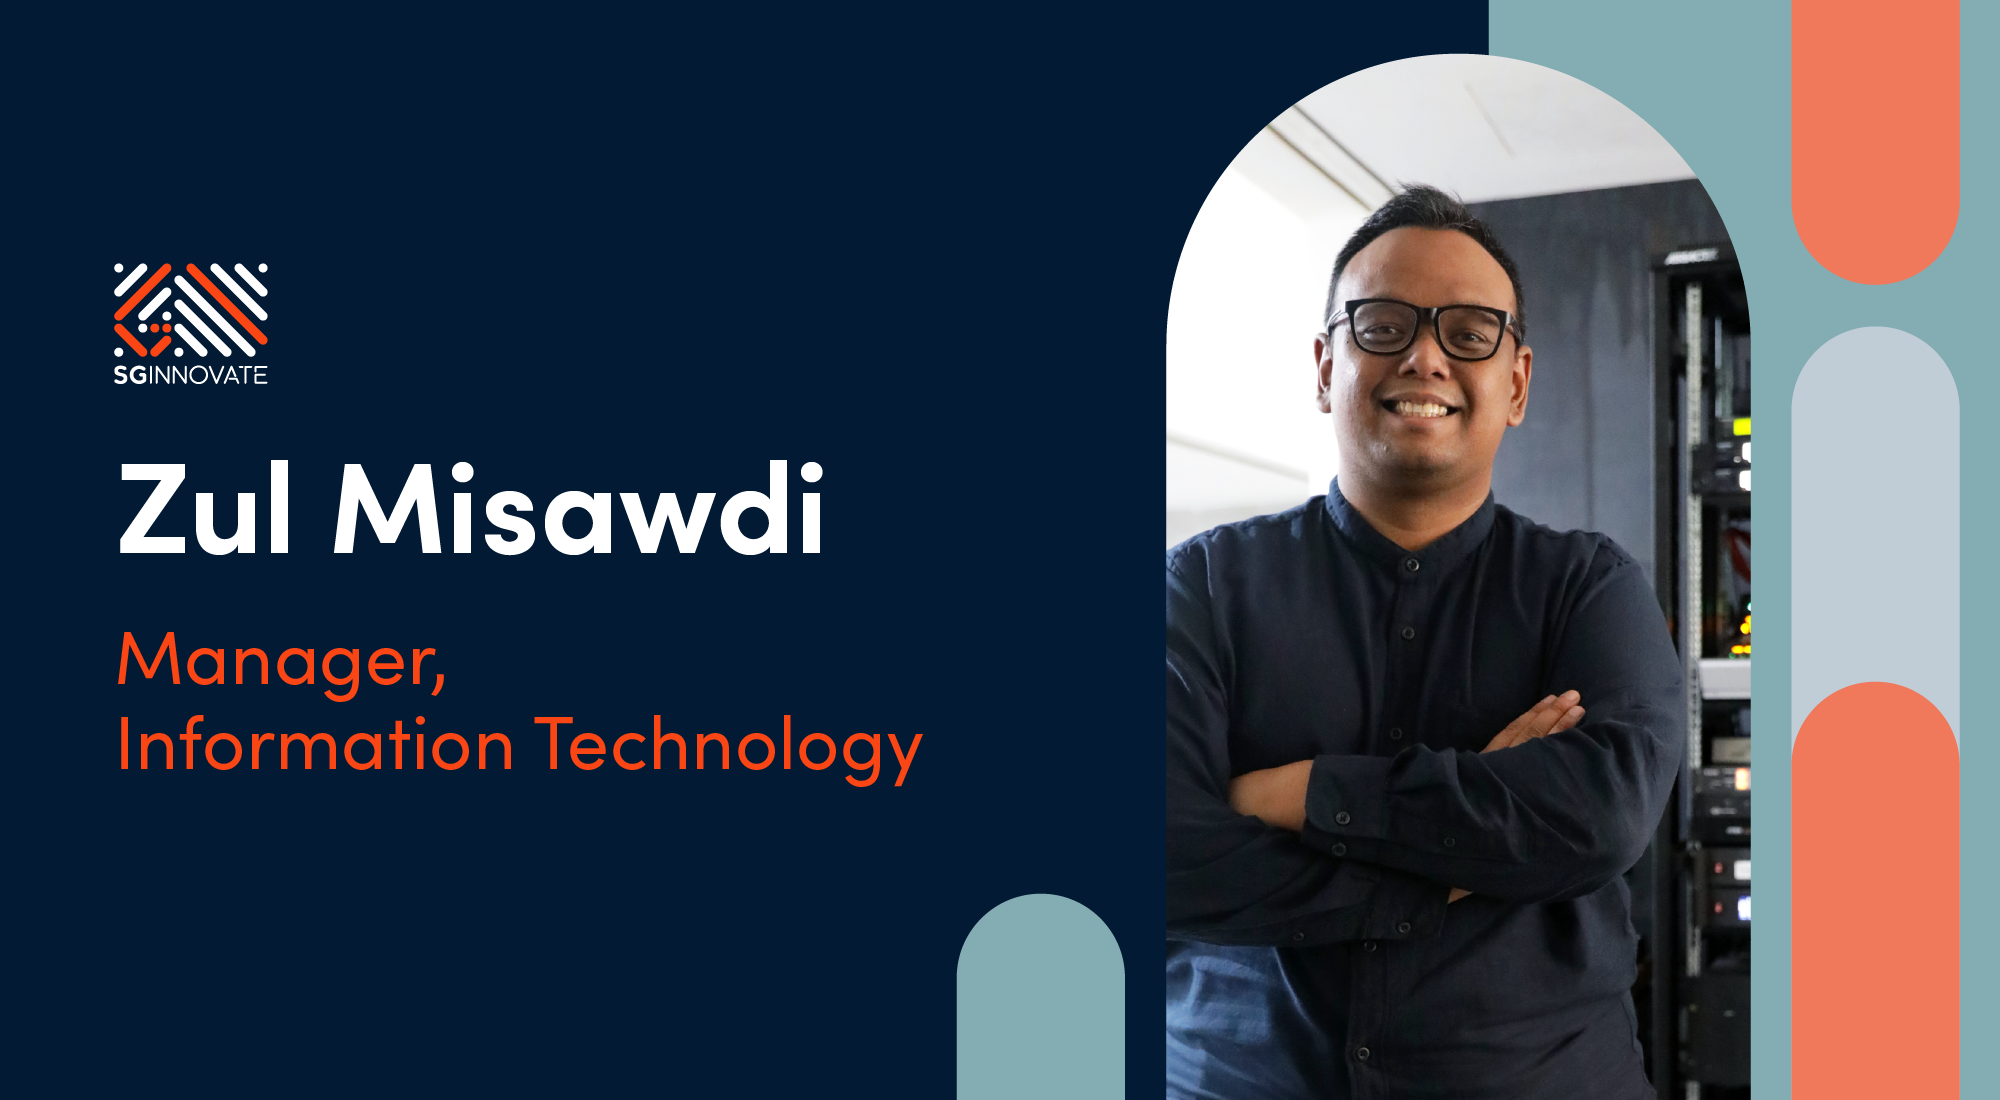 
Fusing a Passion for Connecting with People and His Love of Tech